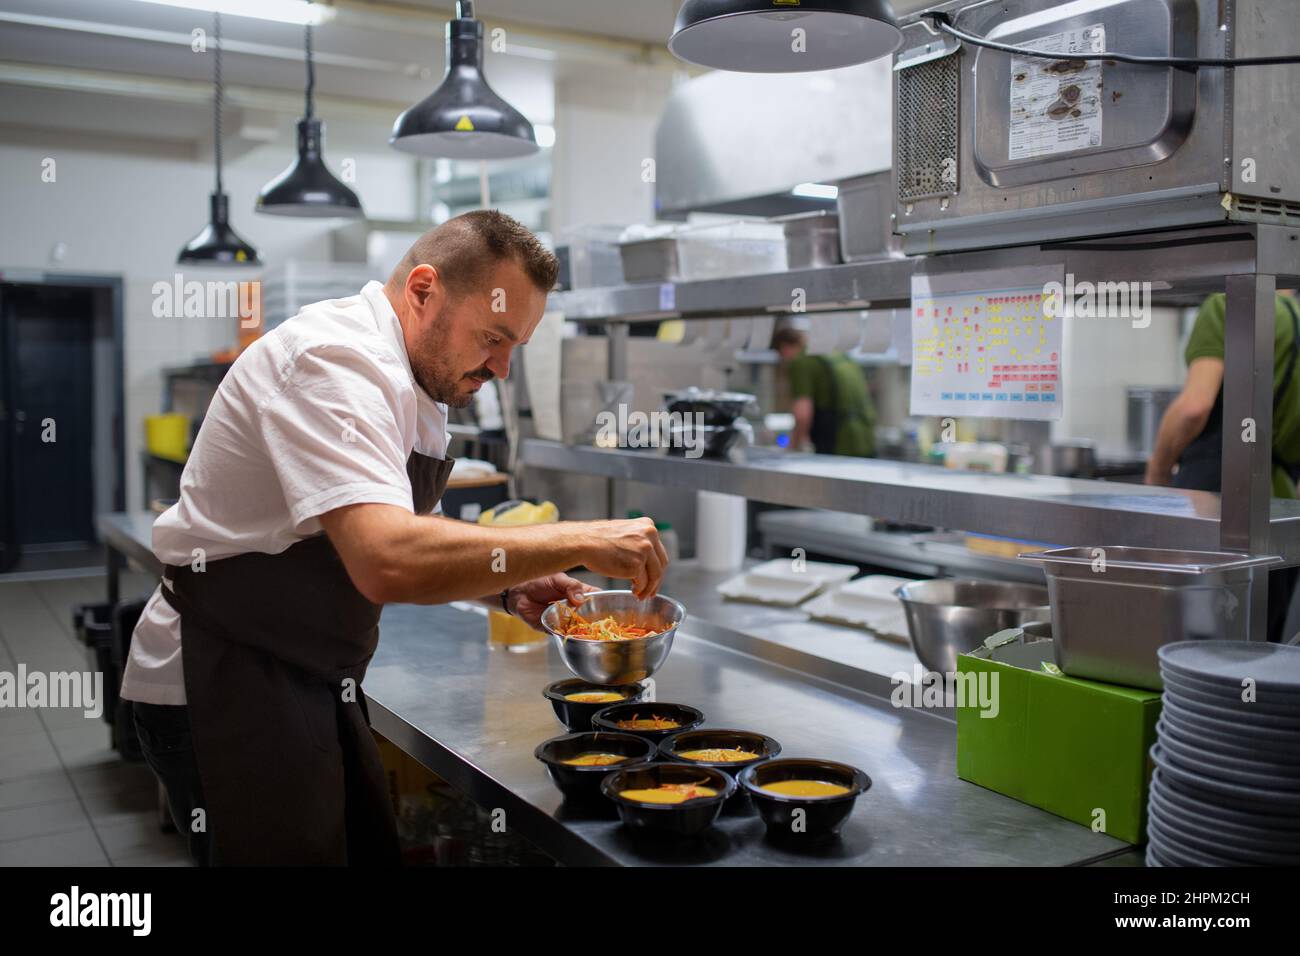 Chef decorating soups in takeaway bowls indoors in restaurant kitchen. Stock Photo